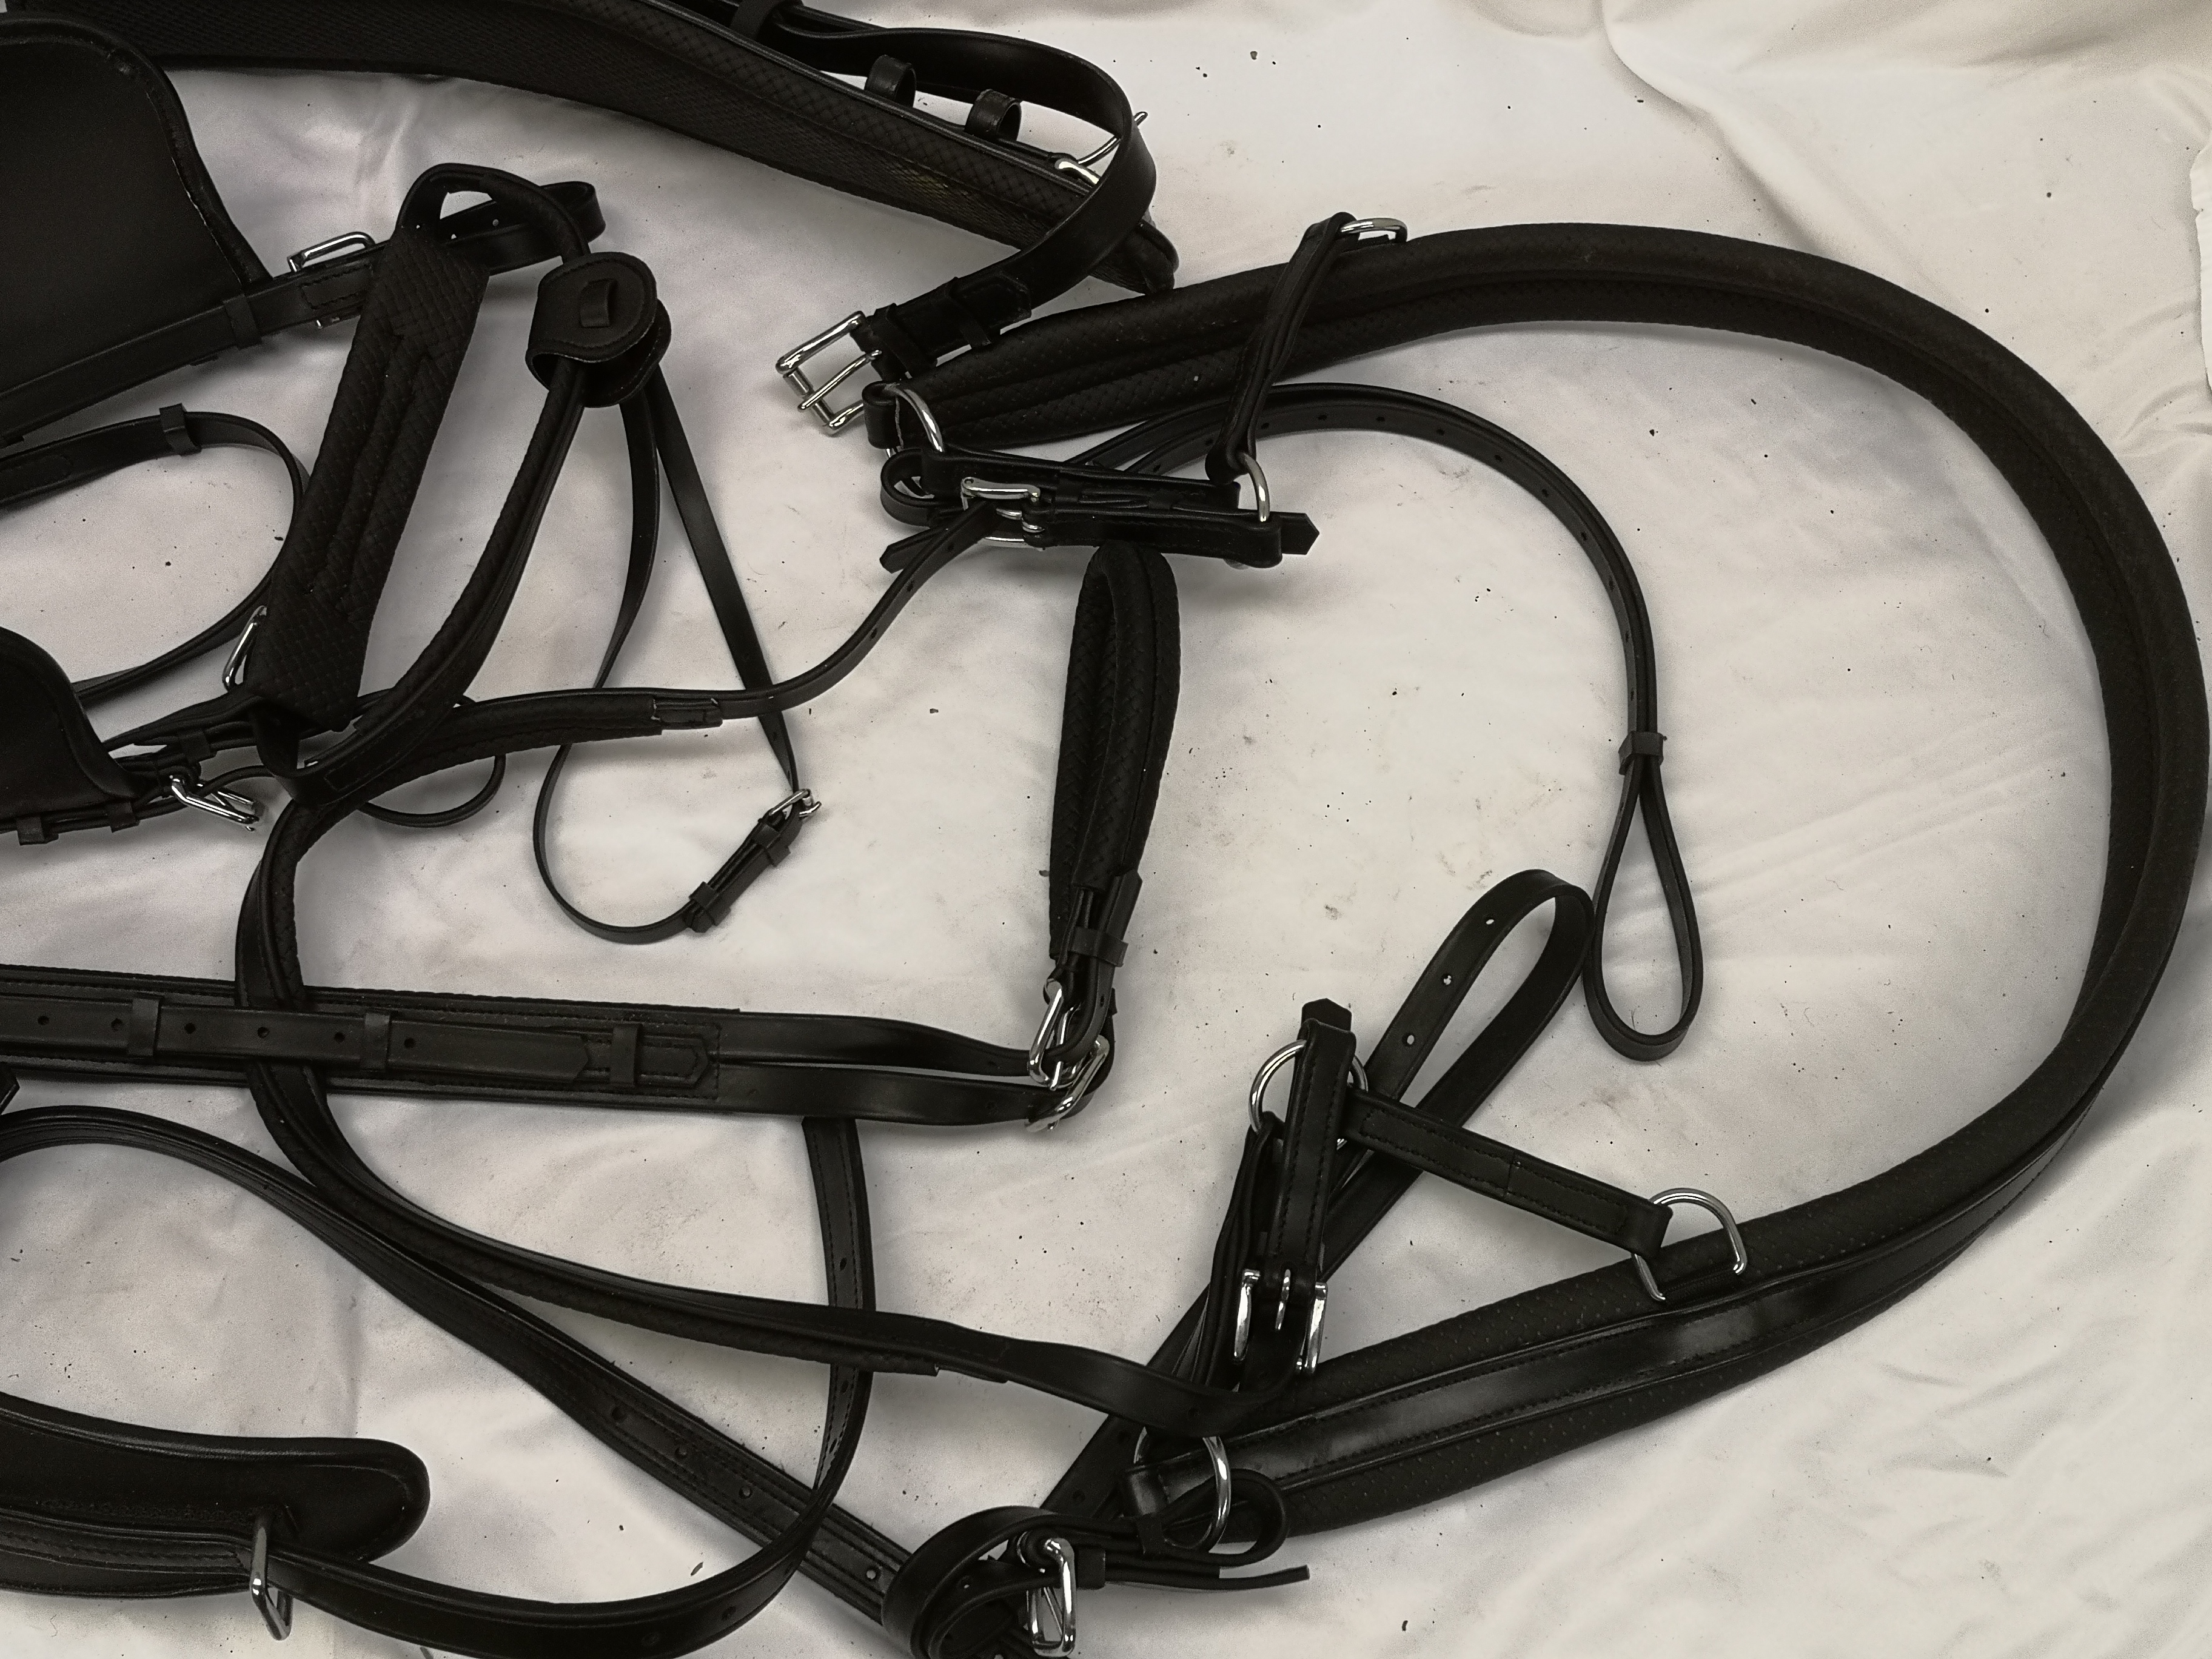 Set of full size harness with empathy collar. This lot carries VAT. - Image 4 of 7